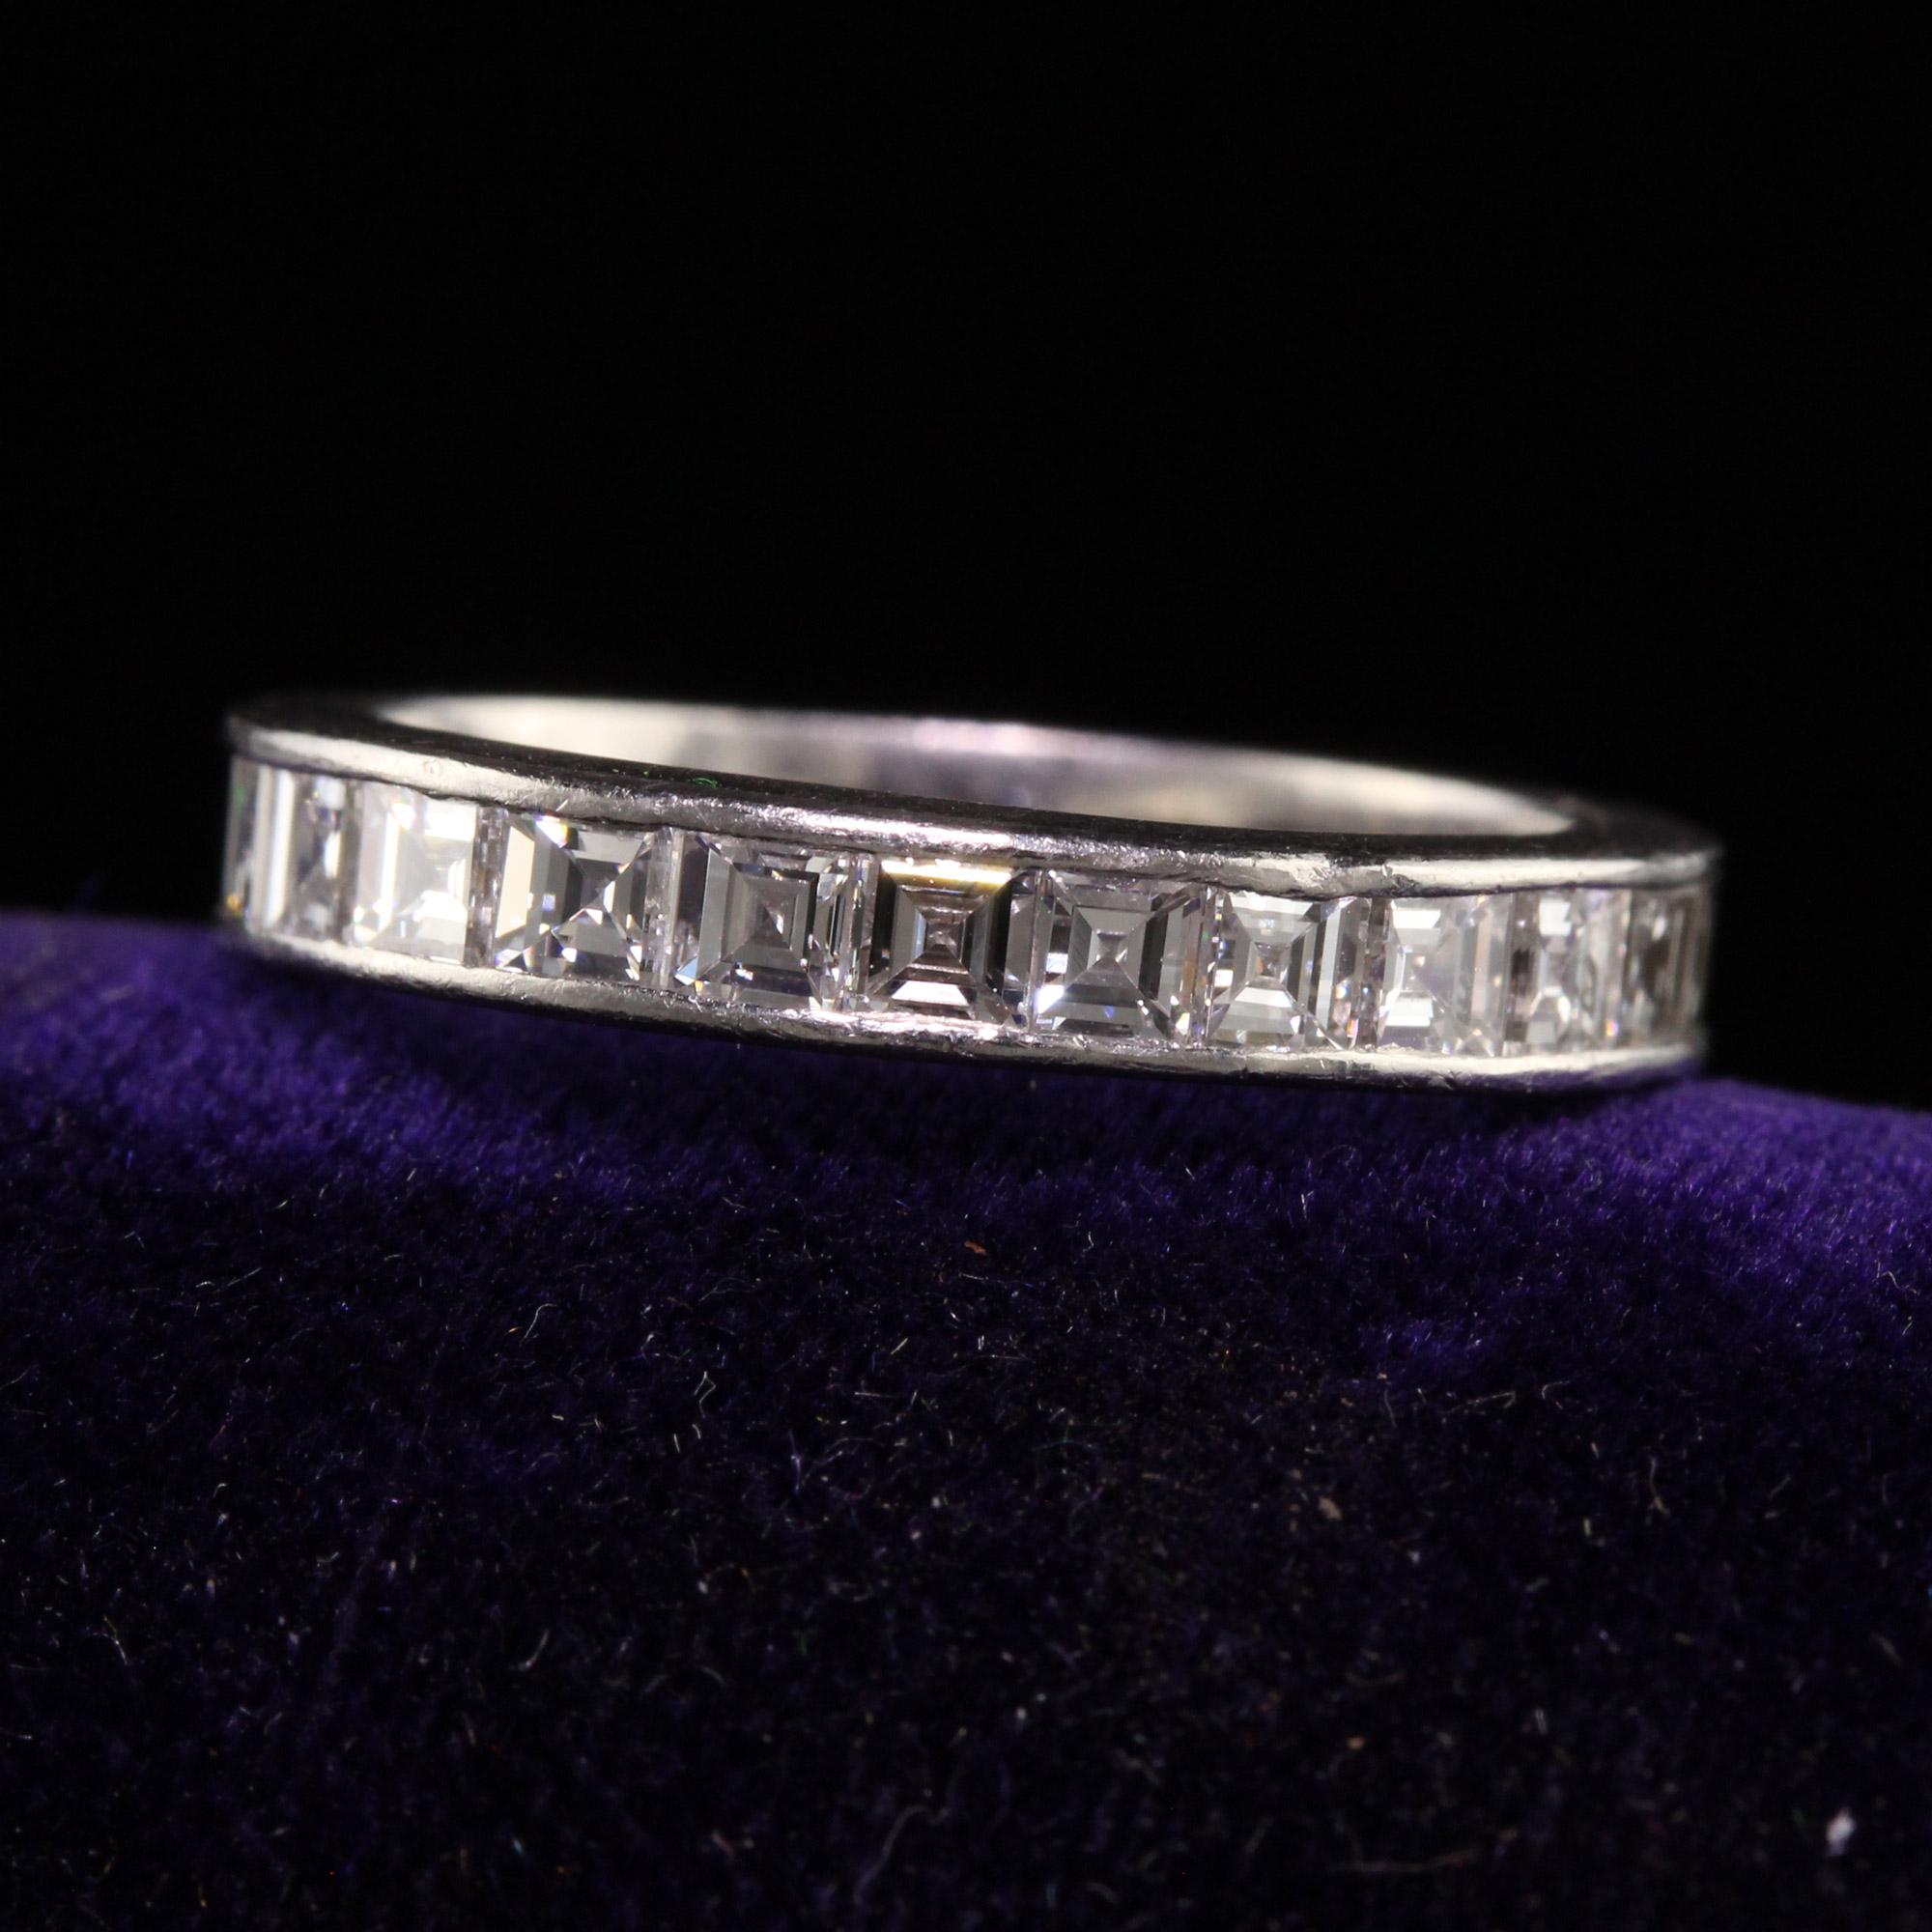 Beautiful Retro Vintage Platinum Carre Cut Diamond Eternity Band - Size 5. This gorgeous eternity band is crafted in platinum. There are gorgeous carre cut diamonds going around the entire ring and it is in great condition.

Item #R1485

Metal: